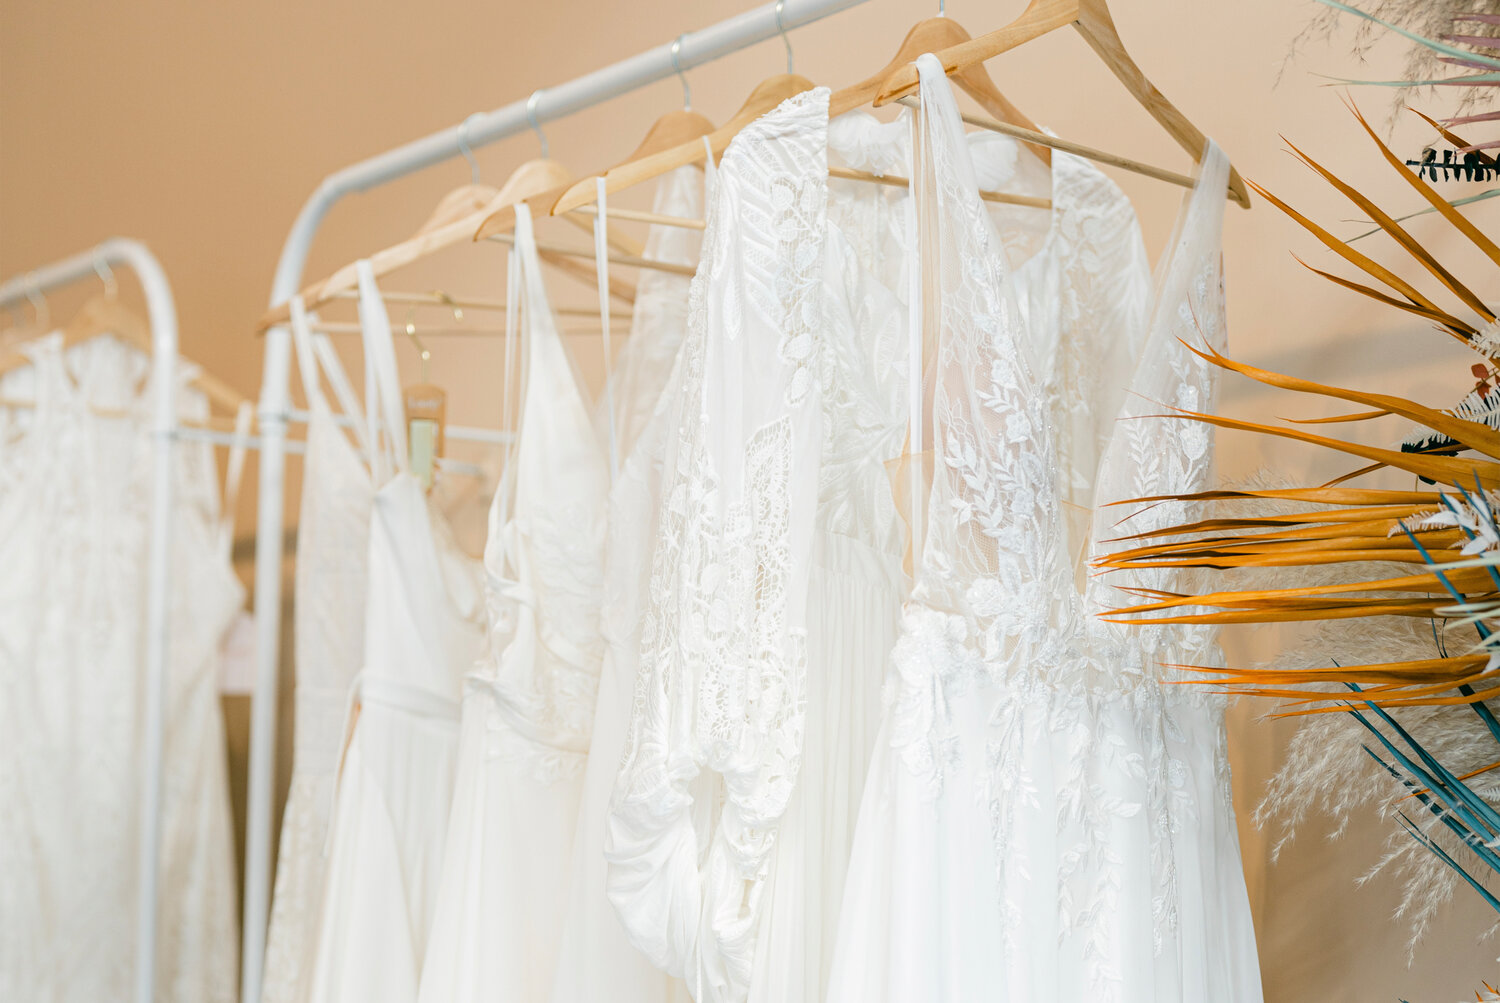 Browse gowns online from Lovely Bride before scheduling a consultation at their Providence store